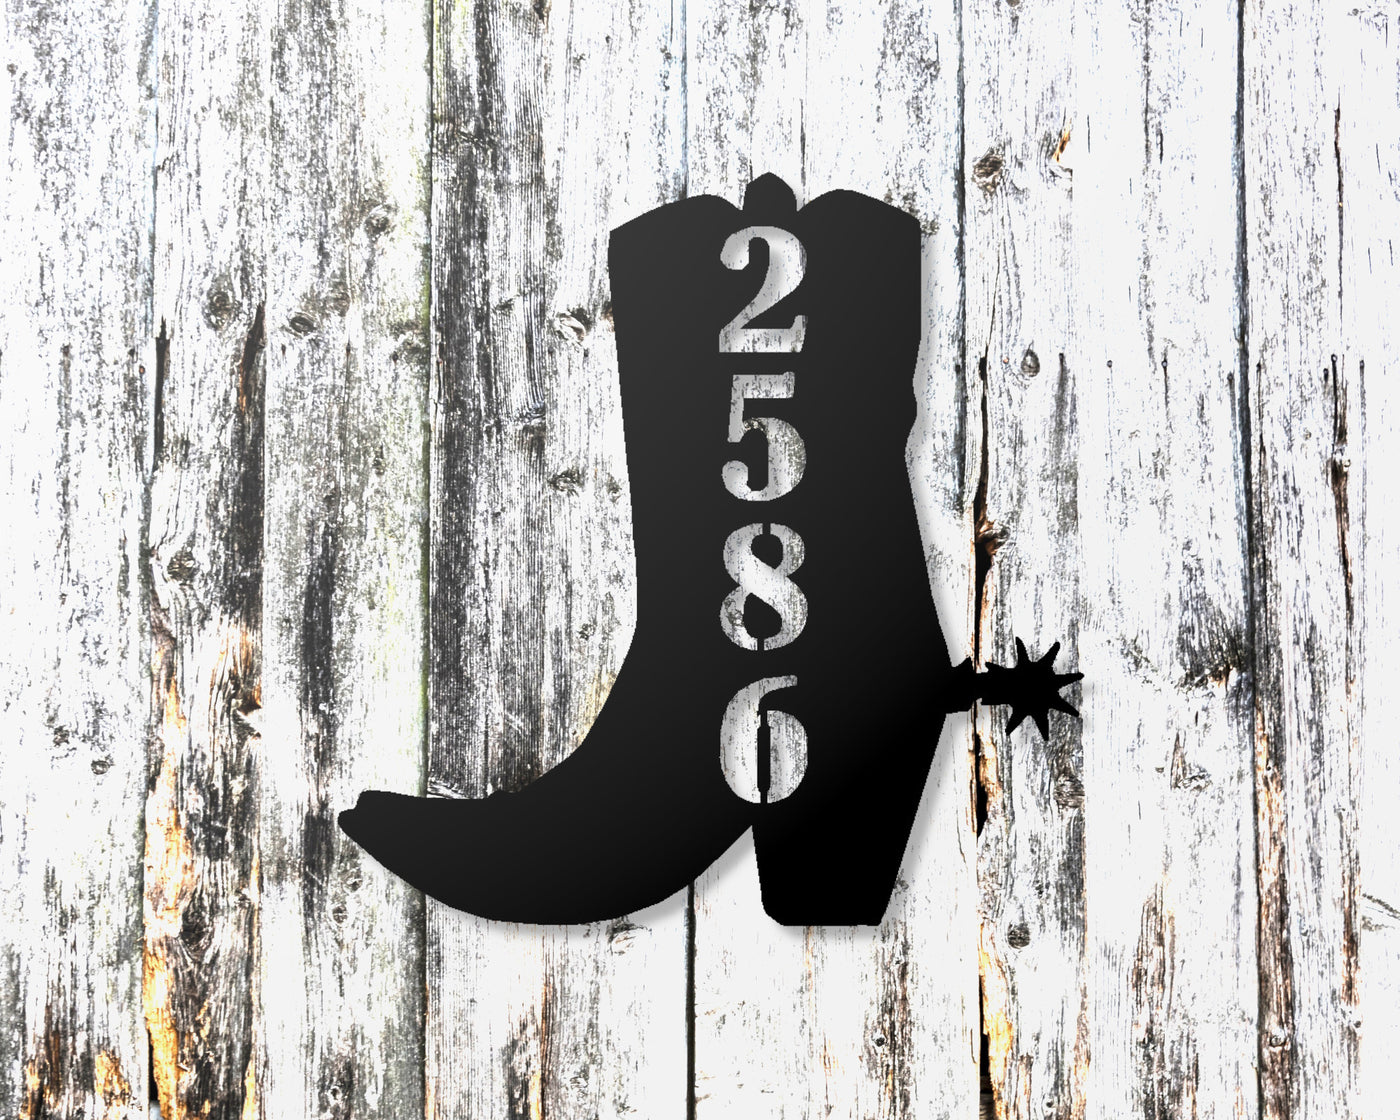 Personalized Cowboy Boot Metal Sign with Street Address Numbers - Madison Iron and Wood - Personalized sign - metal outdoor decor - Steel deocrations - american made products - veteran owned business products - fencing decorations - fencing supplies - custom wall decorations - personalized wall signs - steel - decorative post caps - steel post caps - metal post caps - brackets - structural brackets - home improvement - easter - easter decorations - easter gift - easter yard decor